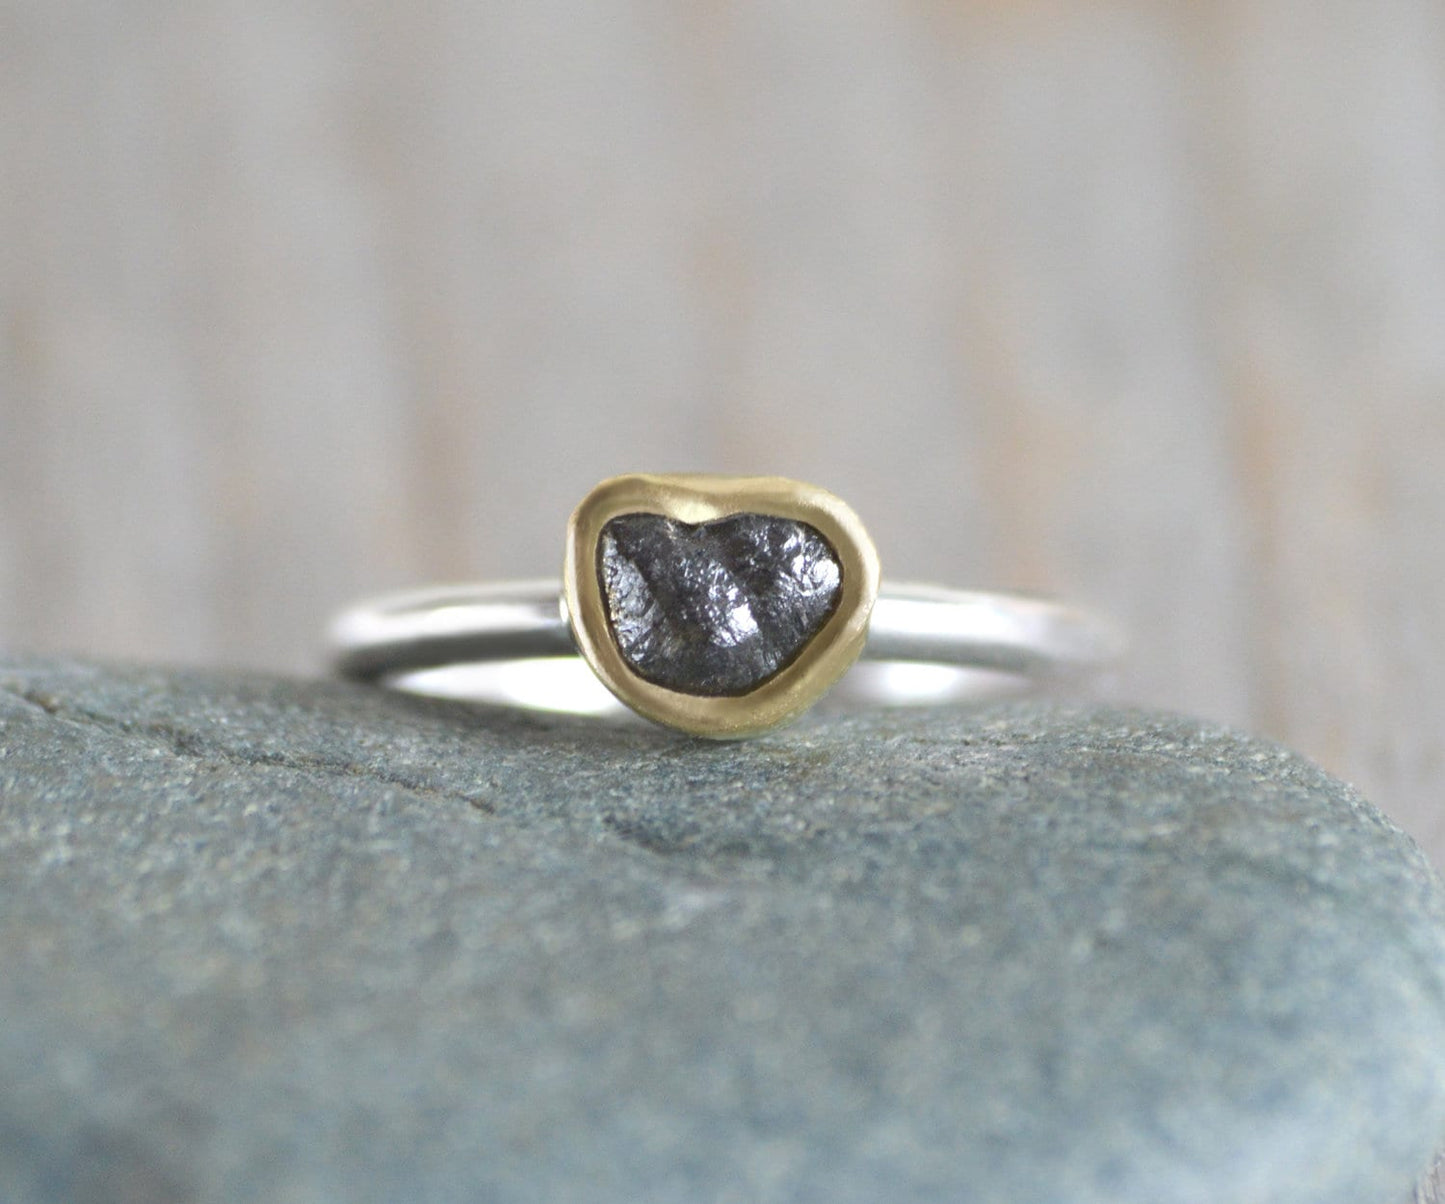 Black Diamond Engagement Ring in 18ct Yellow Gold and Sterling Silver, 2 Tone Diamond Ring